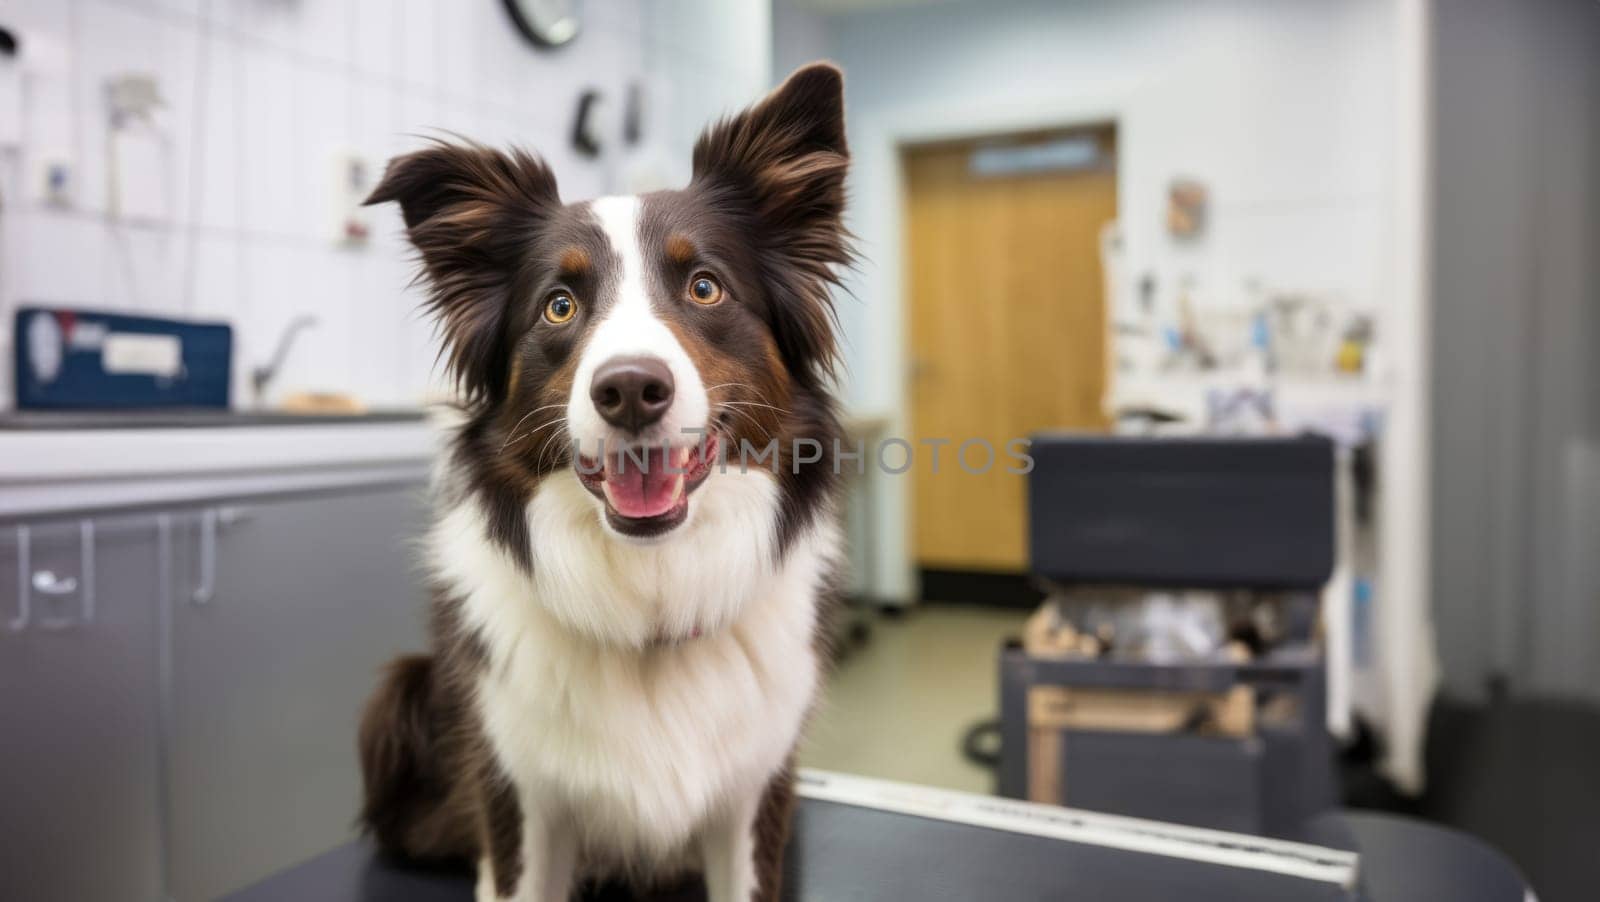 A black-and-white dog patiently awaits its veterinary examination in the clinic.Generated image by dotshock